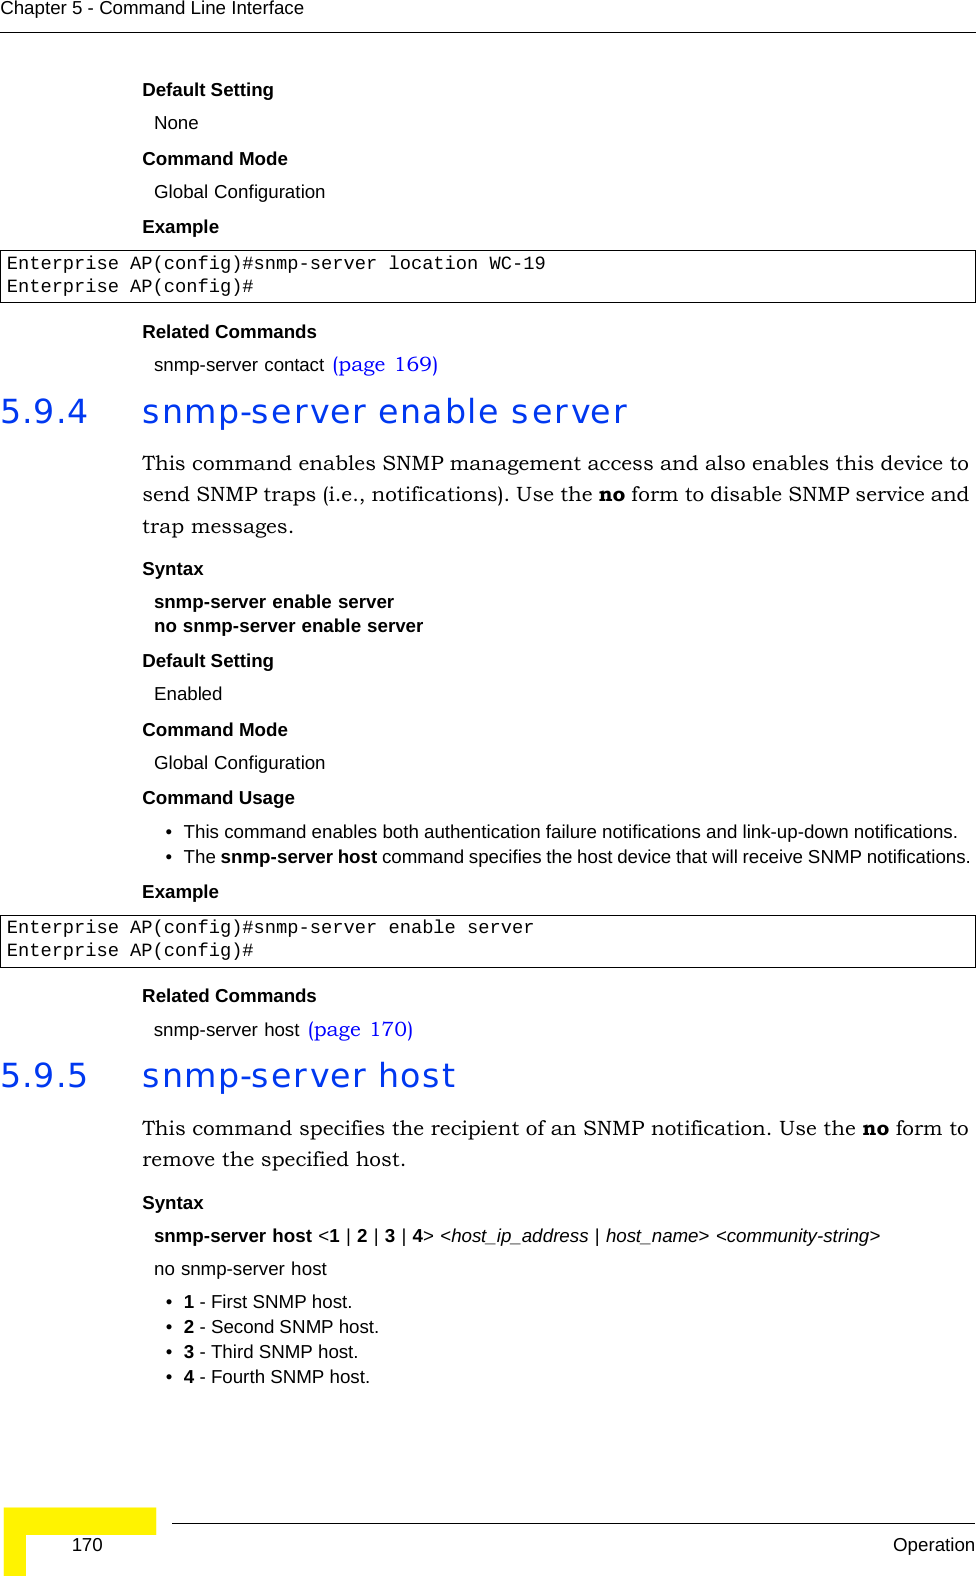  170 OperationChapter 5 - Command Line InterfaceDefault Setting NoneCommand Mode Global ConfigurationExample Related Commandssnmp-server contact (page 169)5.9.4 snmp-server enable serverThis command enables SNMP management access and also enables this device to send SNMP traps (i.e., notifications). Use the no form to disable SNMP service and trap messages.Syntax snmp-server enable serverno snmp-server enable serverDefault Setting EnabledCommand Mode Global ConfigurationCommand Usage • This command enables both authentication failure notifications and link-up-down notifications. • The snmp-server host command specifies the host device that will receive SNMP notifications. Example Related Commandssnmp-server host (page 170)5.9.5 snmp-server host This command specifies the recipient of an SNMP notification. Use the no form to remove the specified host.Syntaxsnmp-server host &lt;1 | 2 | 3 | 4&gt; &lt;host_ip_address | host_name&gt; &lt;community-string&gt;no snmp-server host•1 - First SNMP host.•2 - Second SNMP host.•3 - Third SNMP host.•4 - Fourth SNMP host.Enterprise AP(config)#snmp-server location WC-19Enterprise AP(config)#Enterprise AP(config)#snmp-server enable serverEnterprise AP(config)#